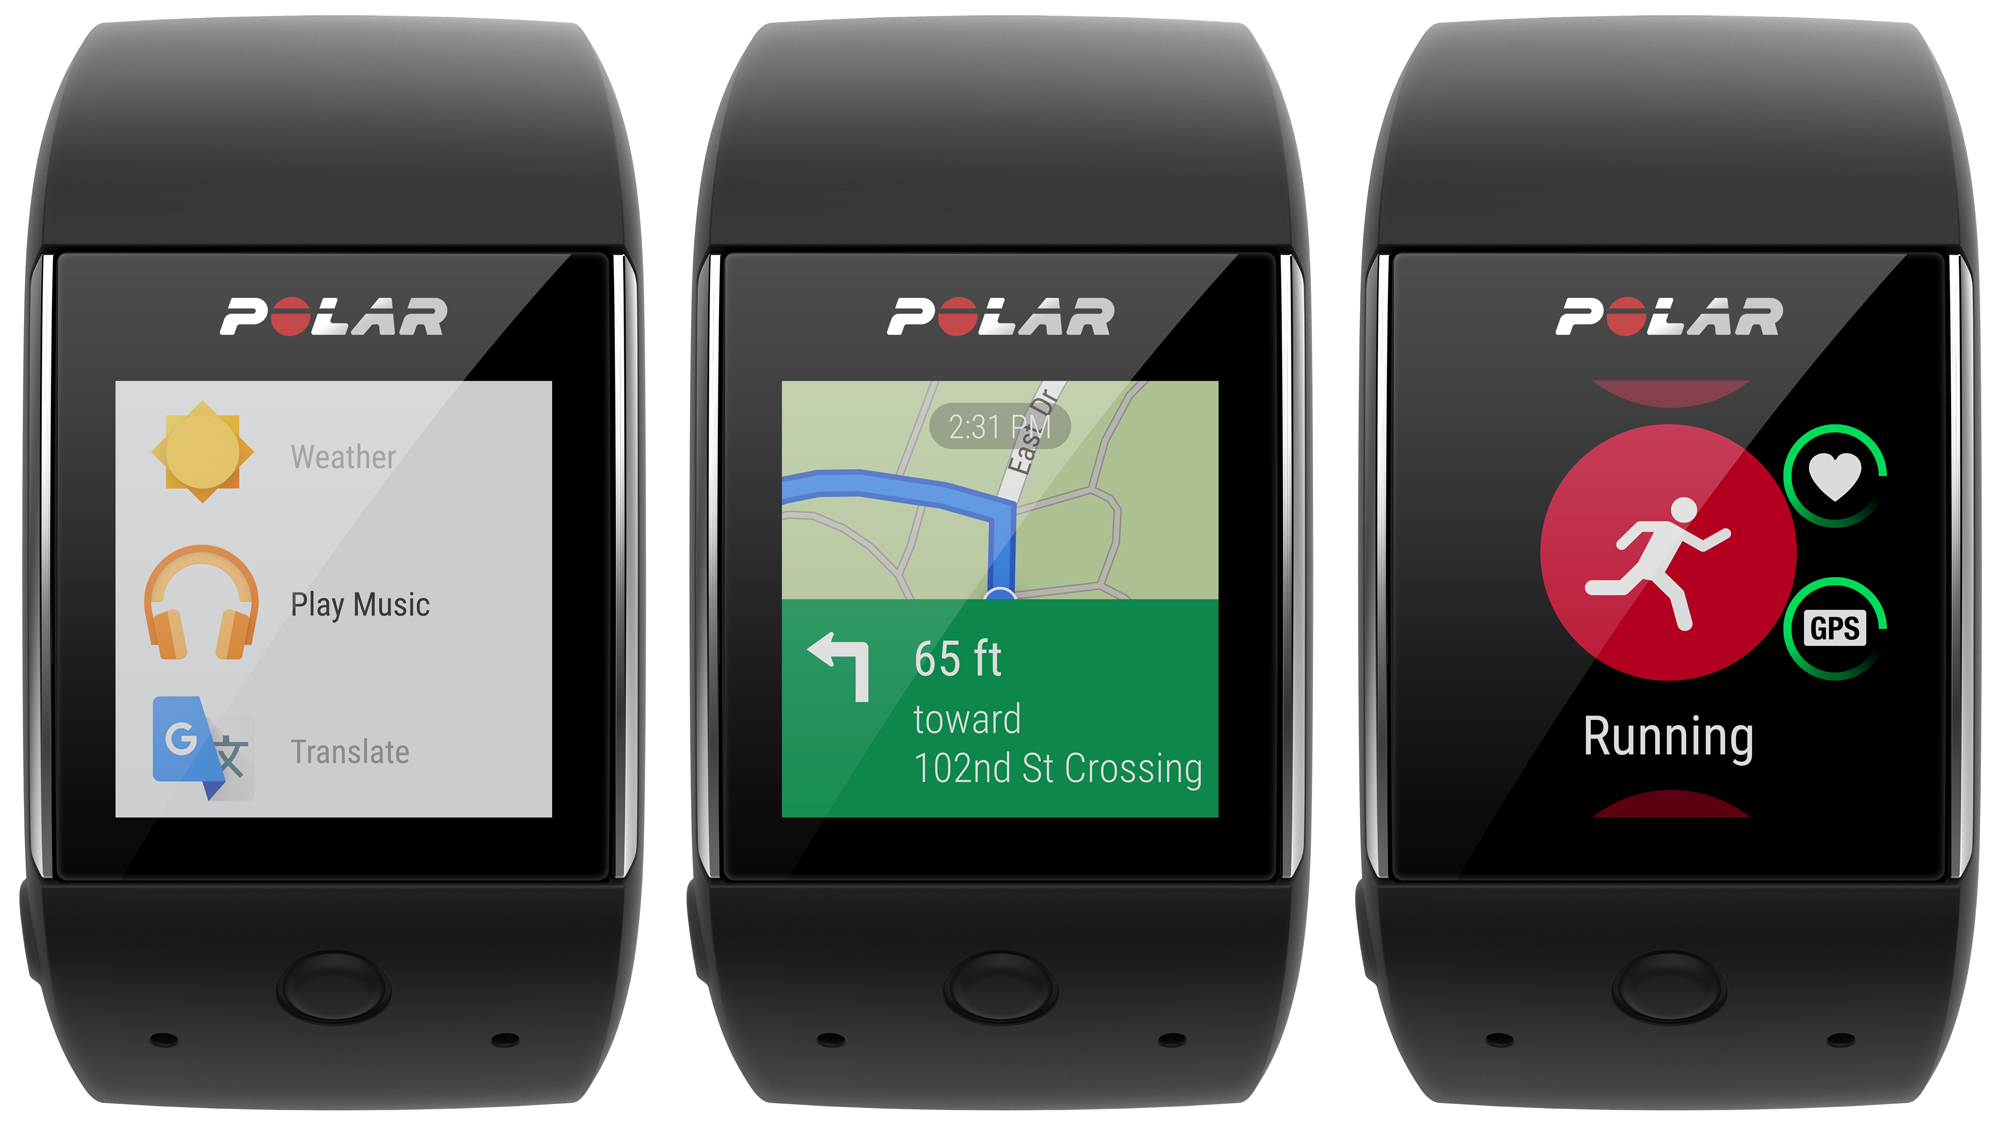 Polar’s New Fitness Tracker Is A Full-On Android Smartwatch